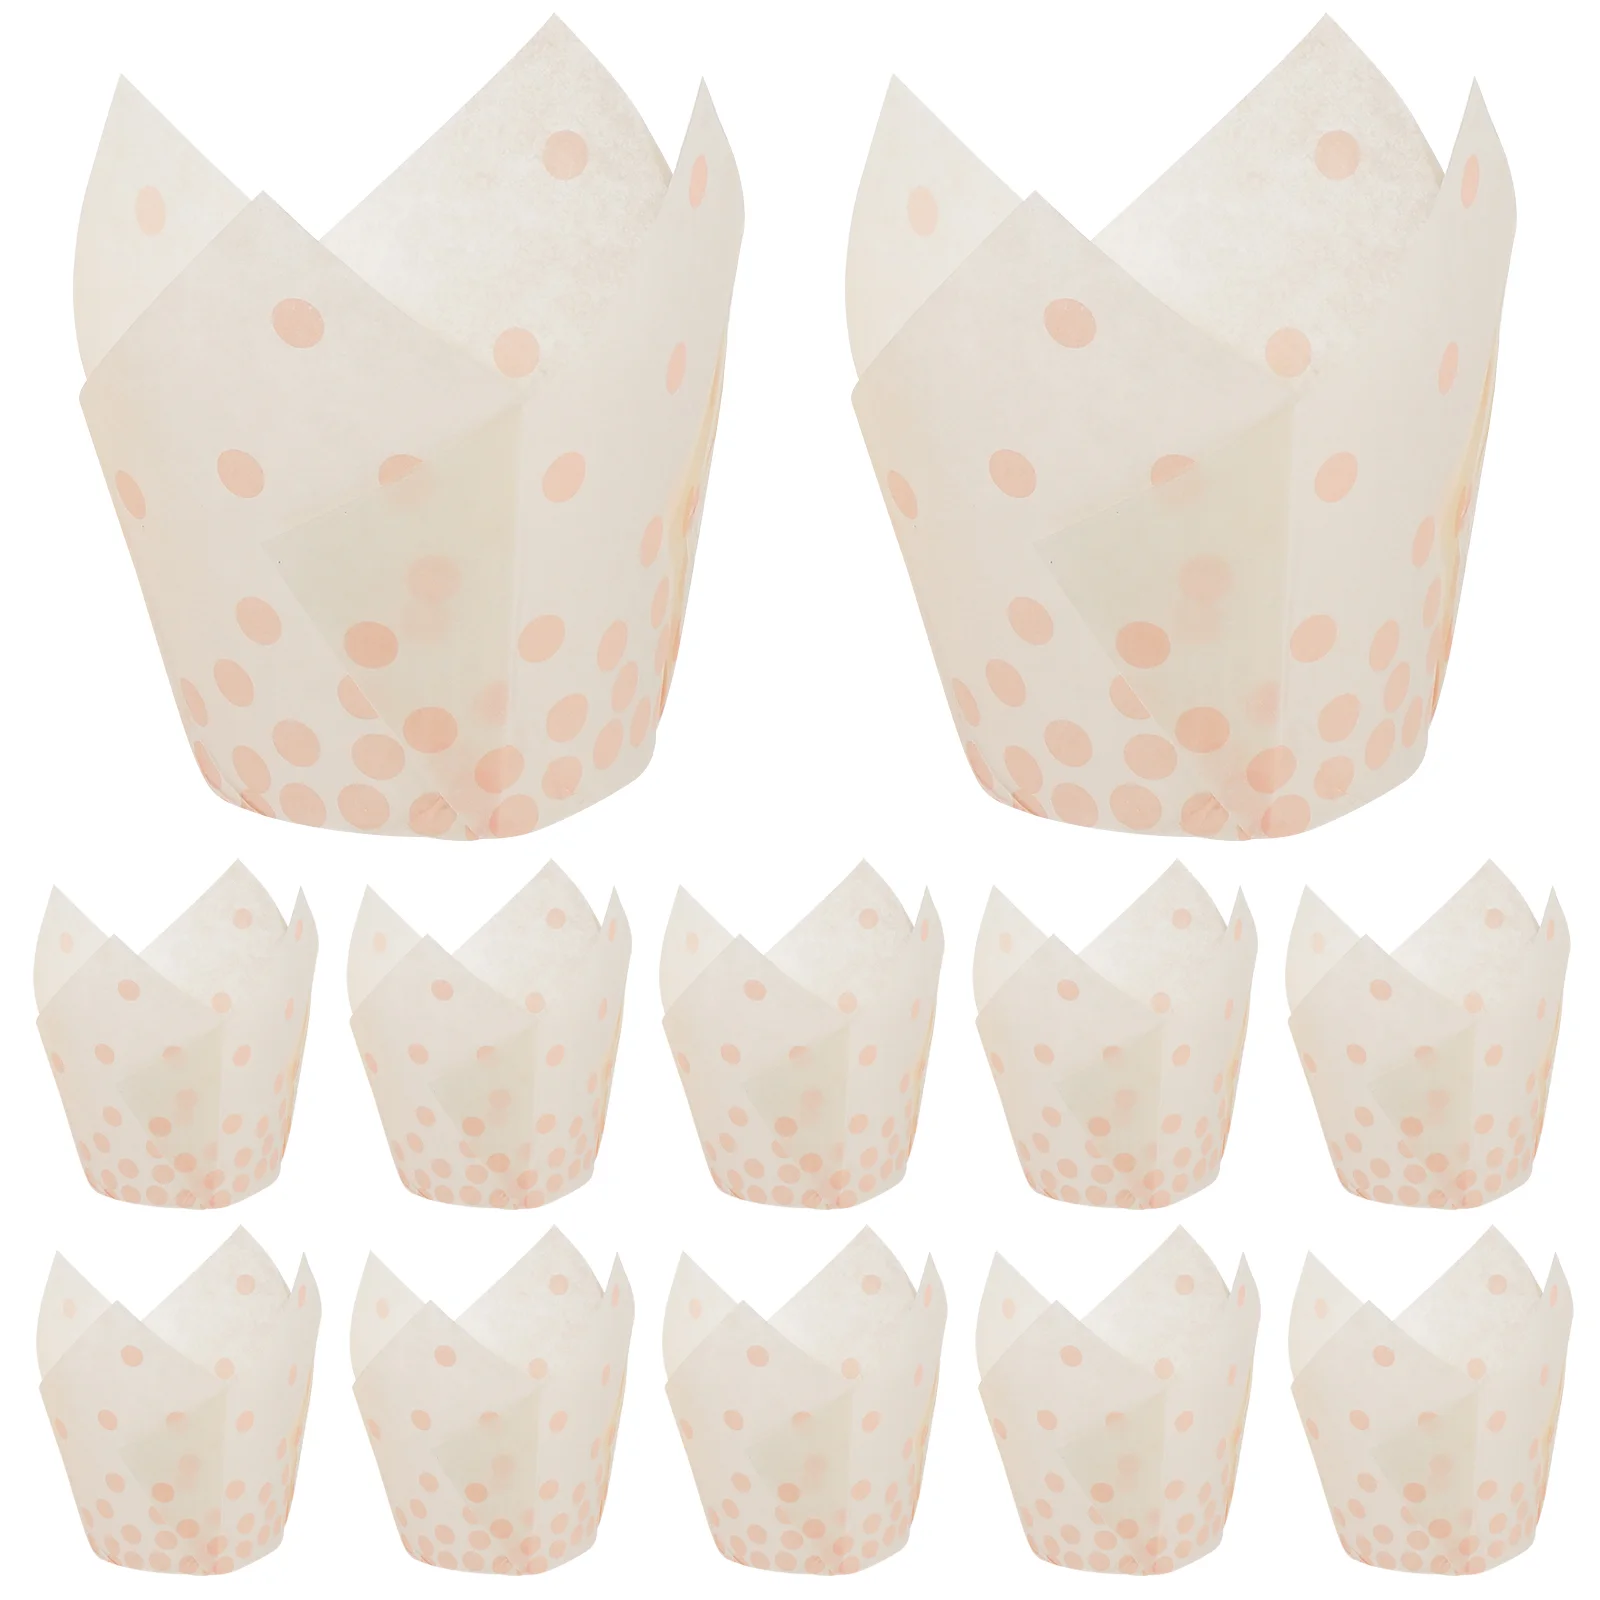 

50pcs Bakery Paper Liners Cupcake Baking Cups Exquisite Cupcake Wrappers Cupcake Muffin Liners